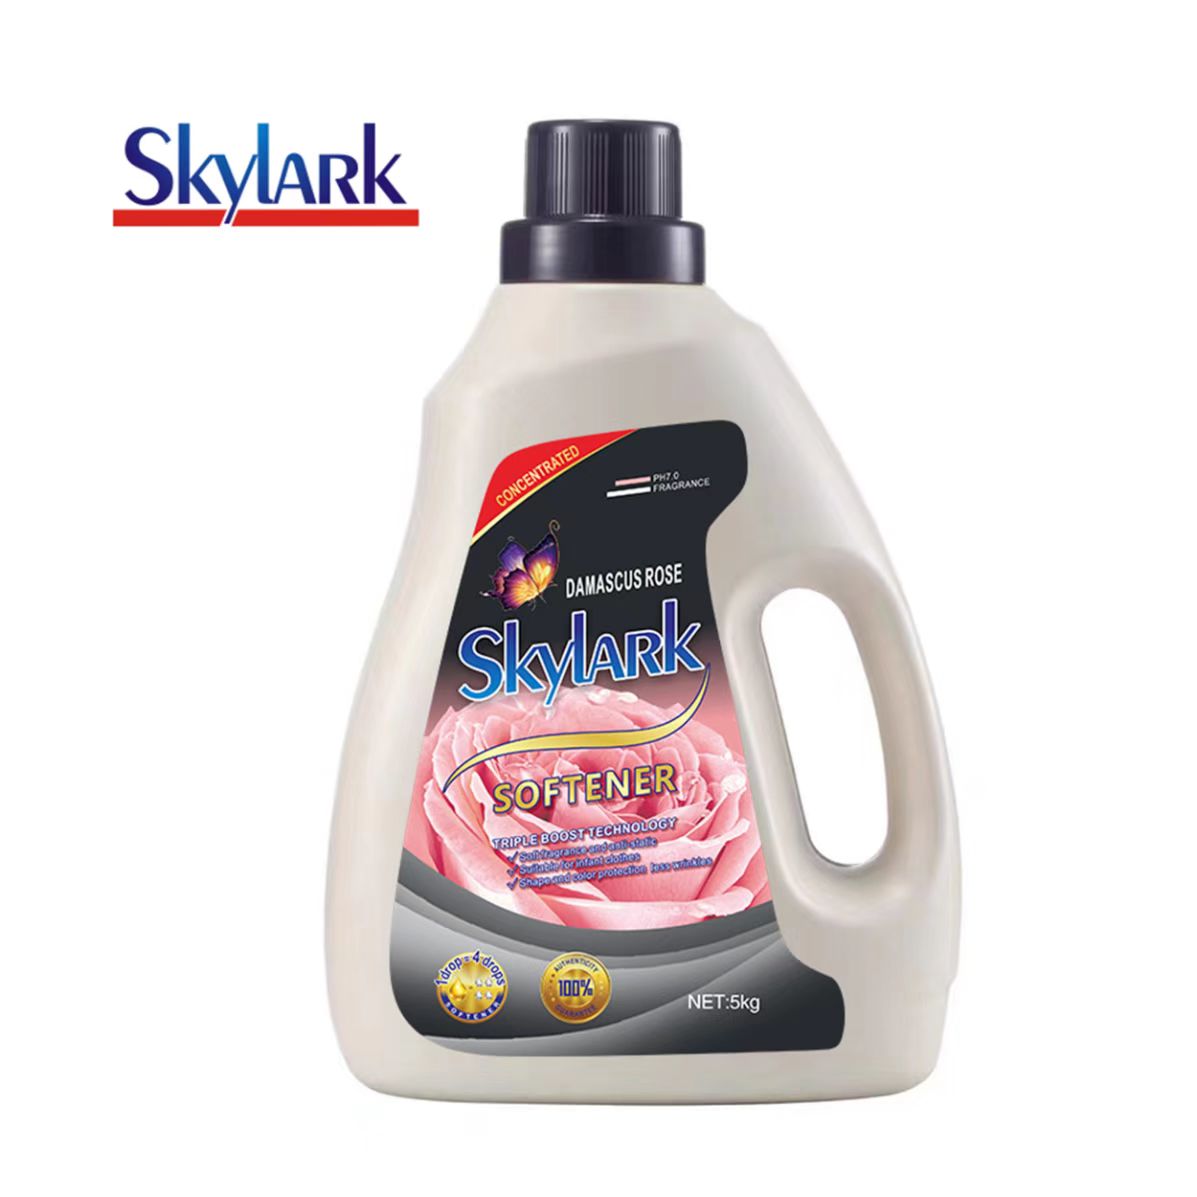 Super Damascus Rose Concentrated Type Fabric Softener With Excellent Performance